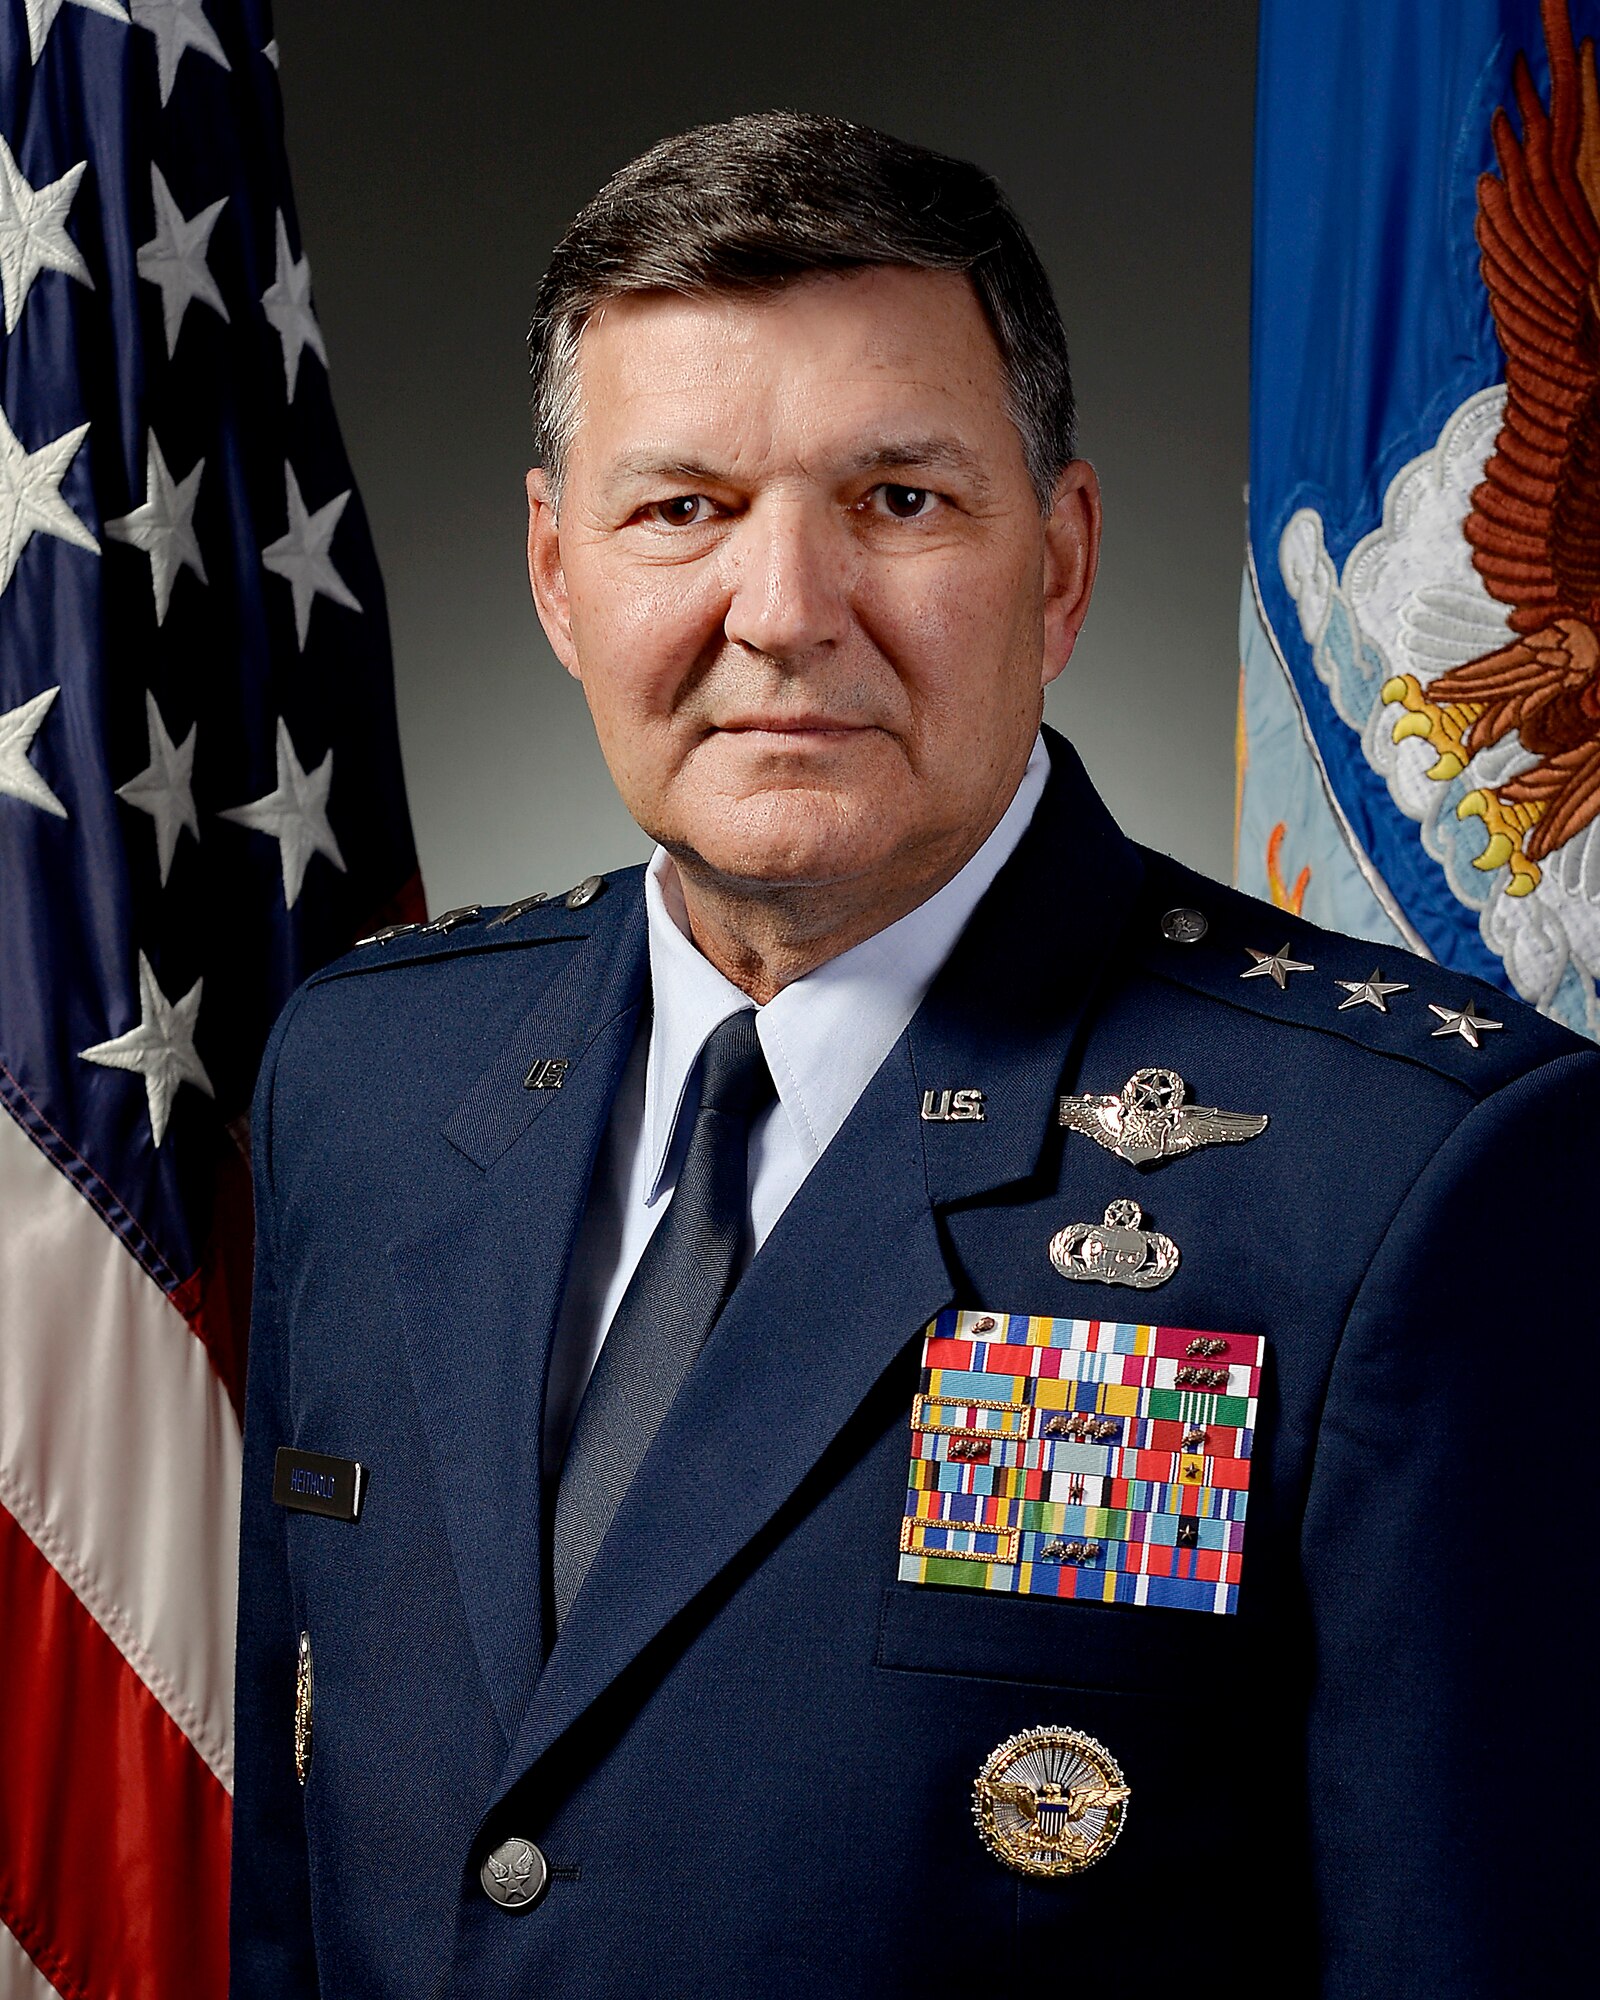 Lt. Gen. Bradley Heithold, former commander, Air Force Special Operations Command